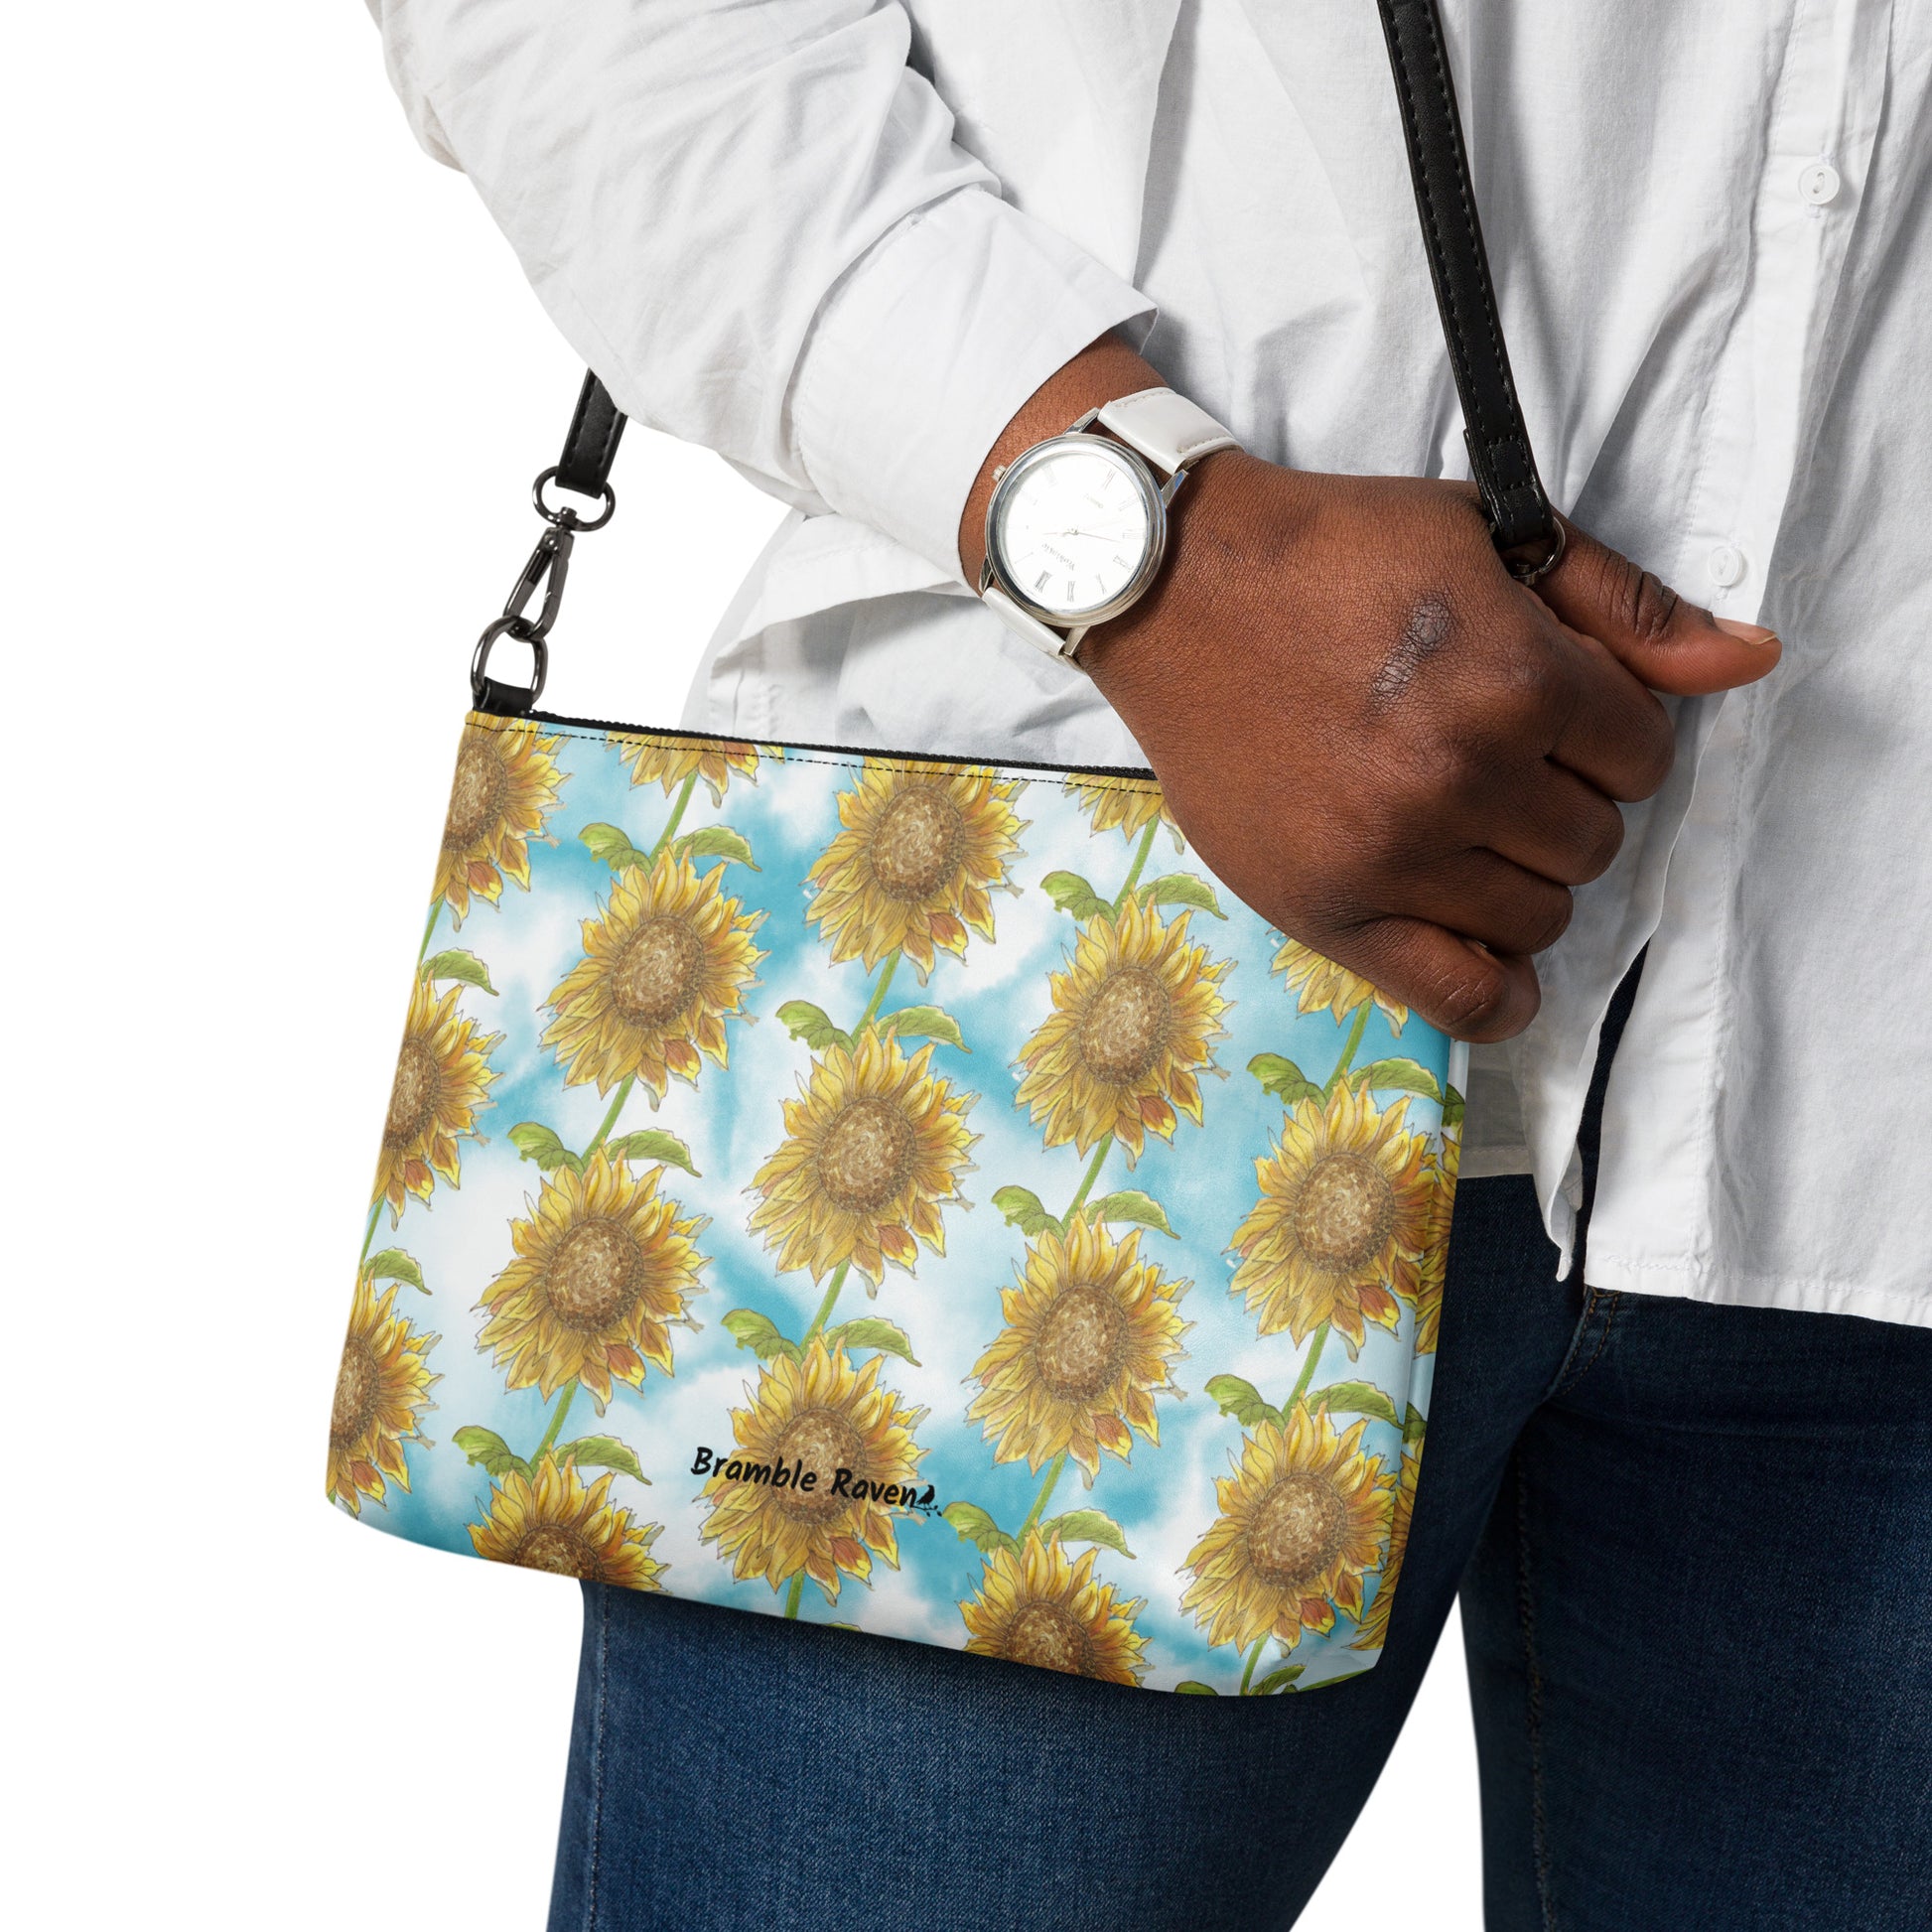 Sunflower crossbody bag. Faux leather with polyester lining and dark grey hardware. Comes with adjustable removable black wrist and shoulder straps. Features patterned design of watercolor sunflowers against a cloudy blue background. Shown on model's shoulder.